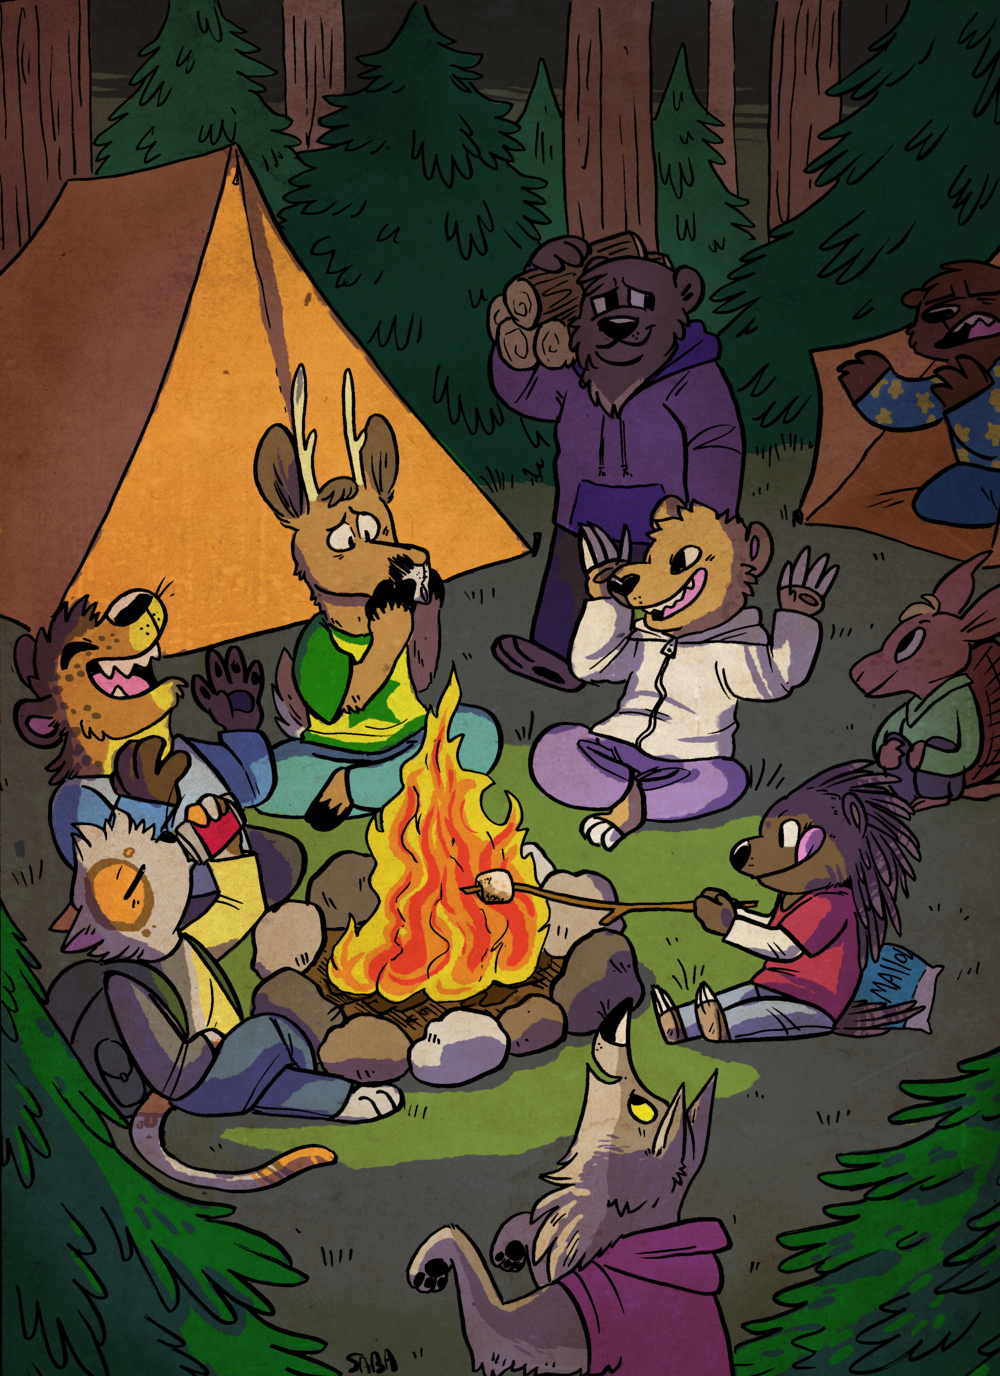 campfire.png